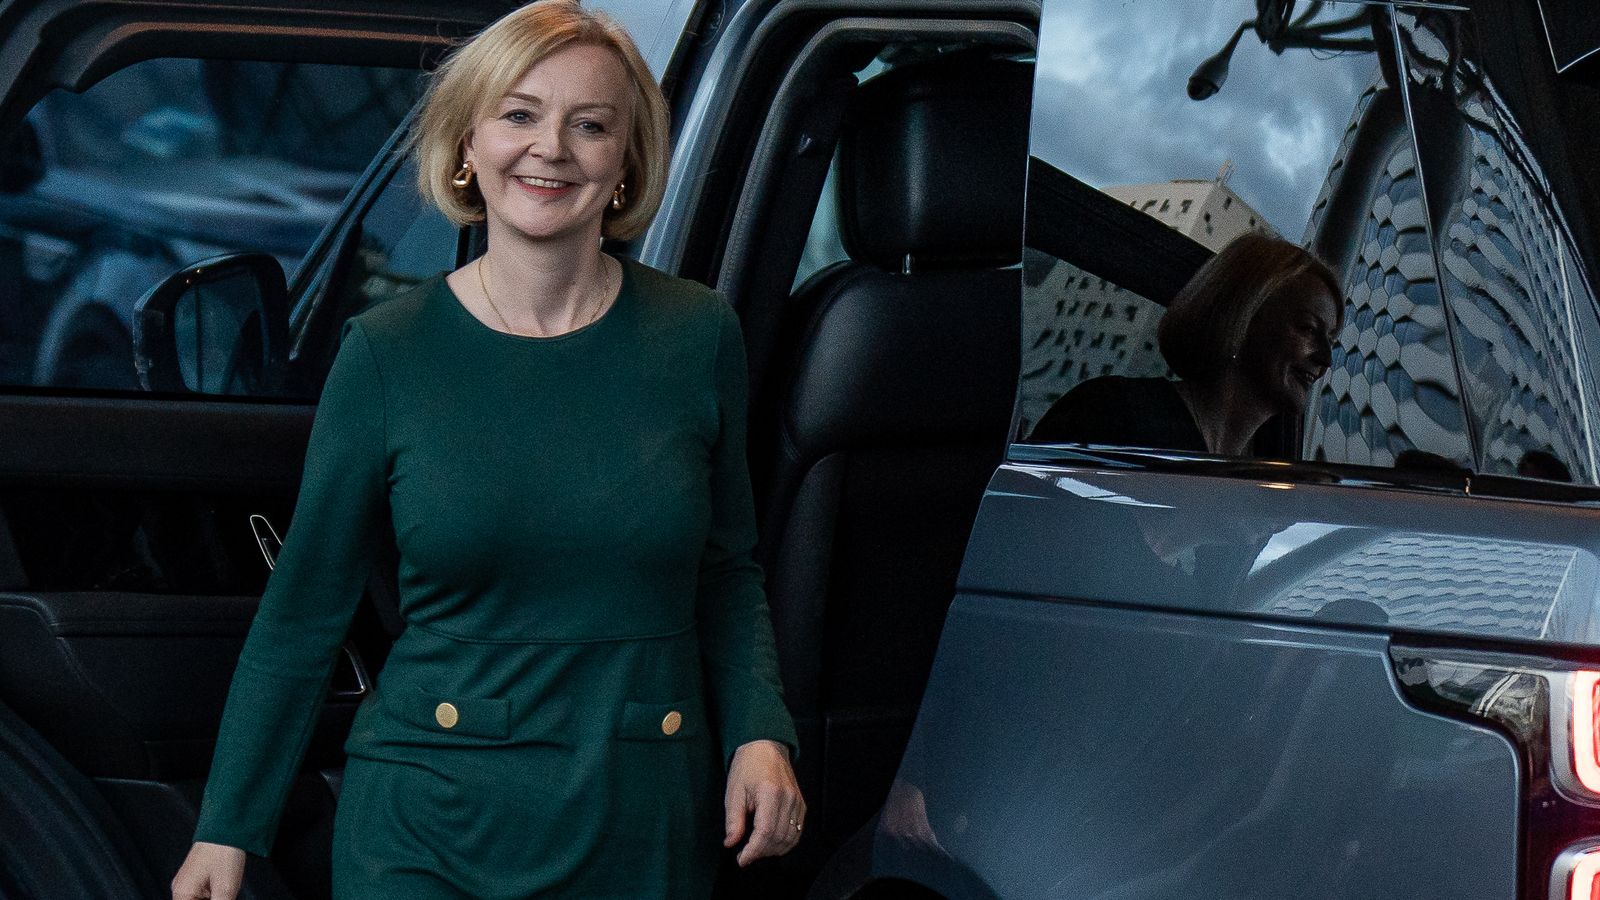 Liz Truss to face wretched week at Tory Party conference after mini-budget turmoil